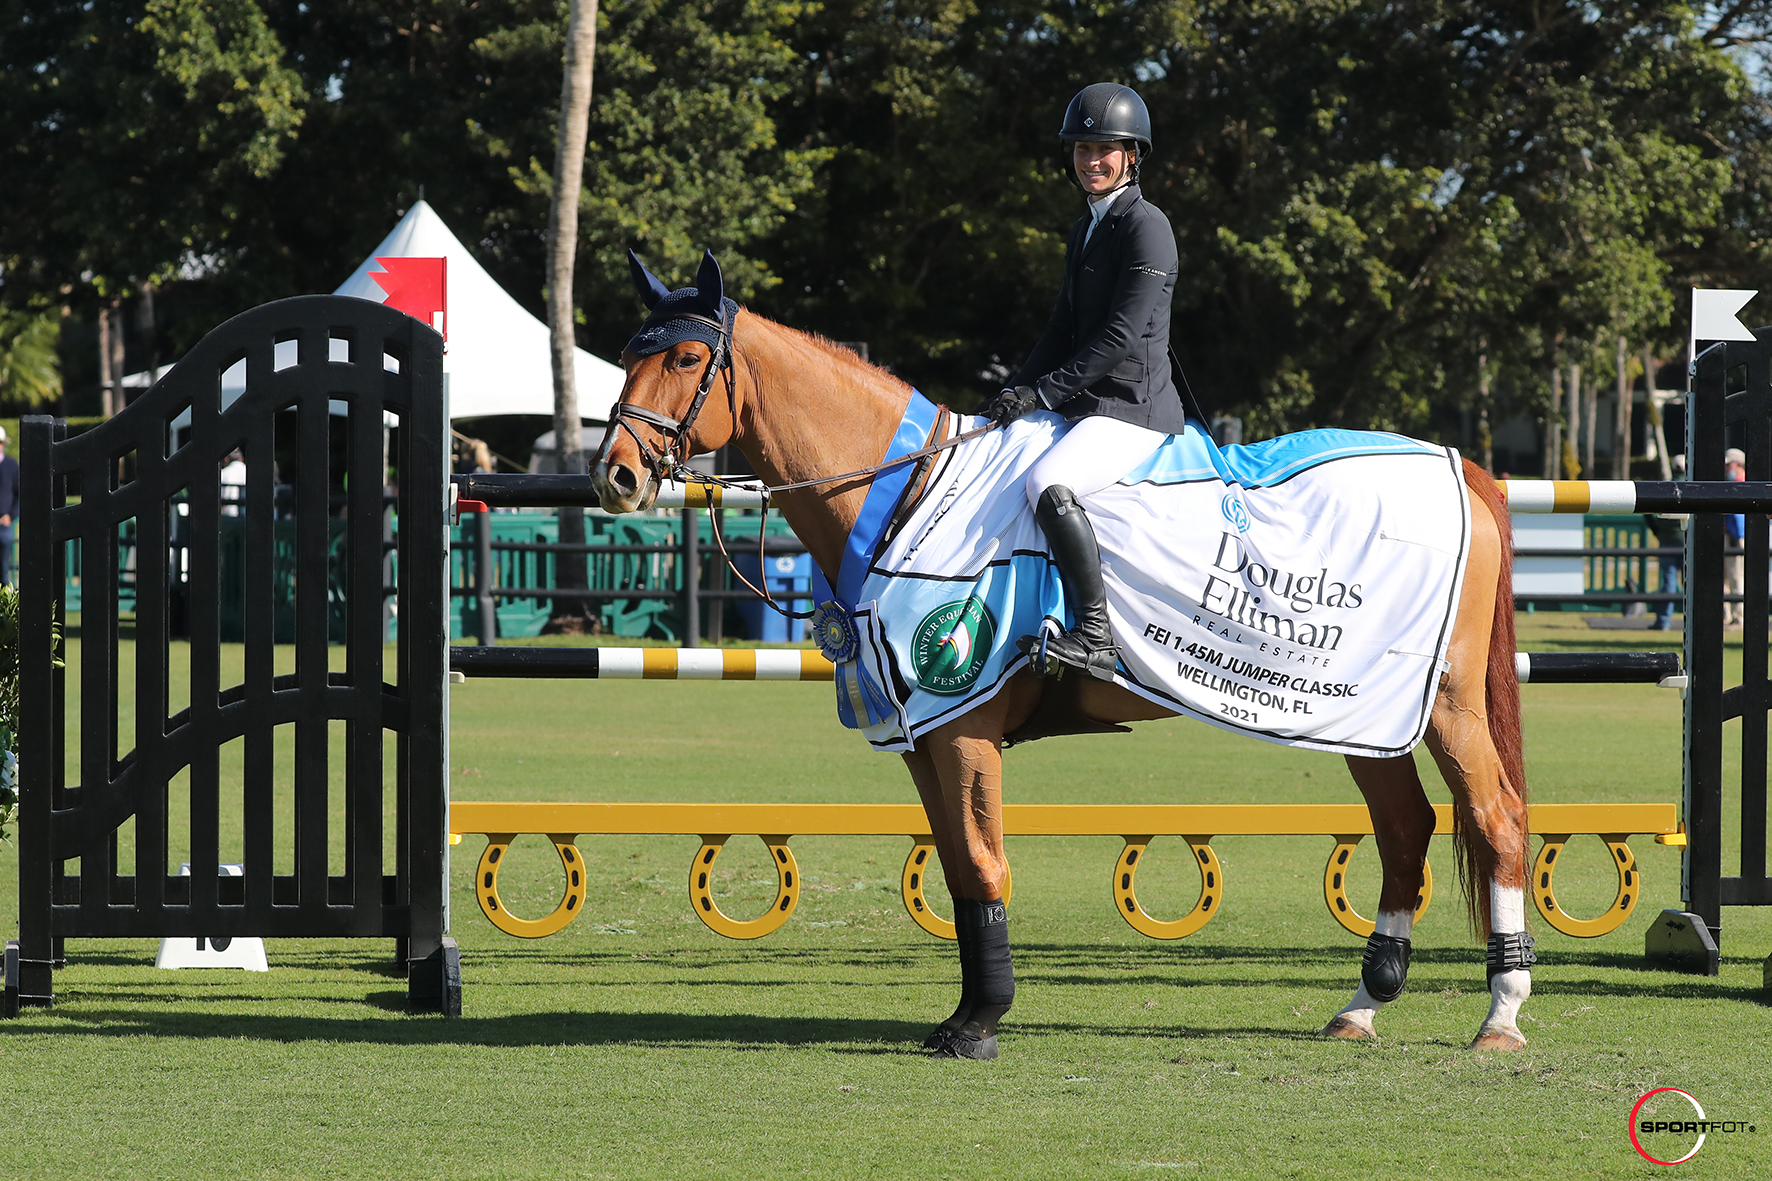 A Winning Birthday for Sydney Shulman and Azilis Du Mesnil in the $6,000 Douglas Elliman FEI 1.45m Jumpers